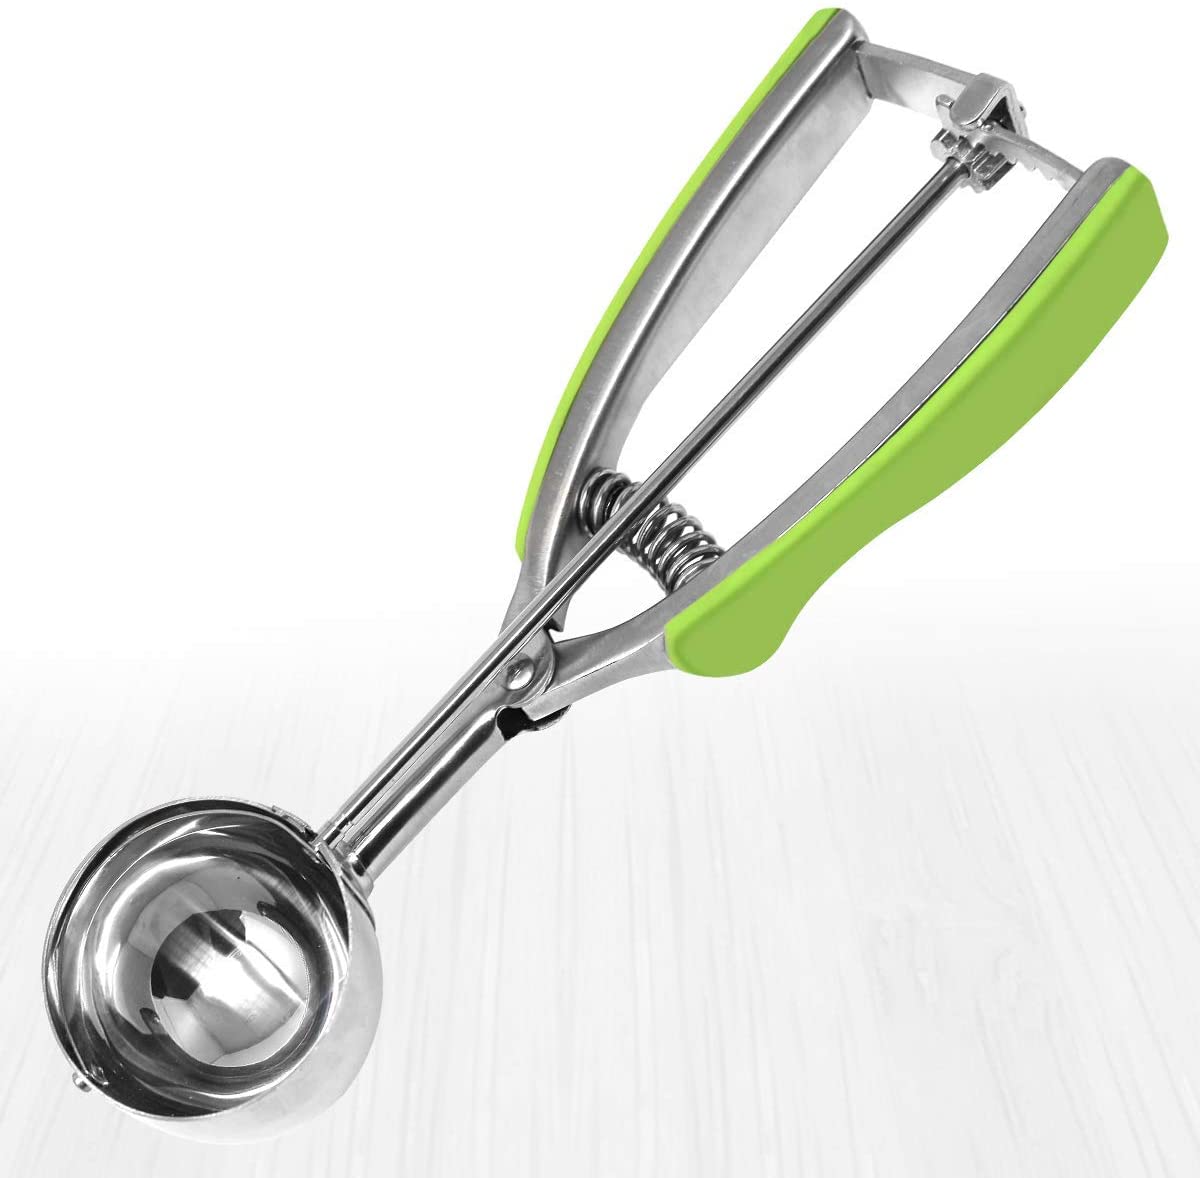 Millvado Stainless Steel Ice Cream Scoop, Large 2.5", Green